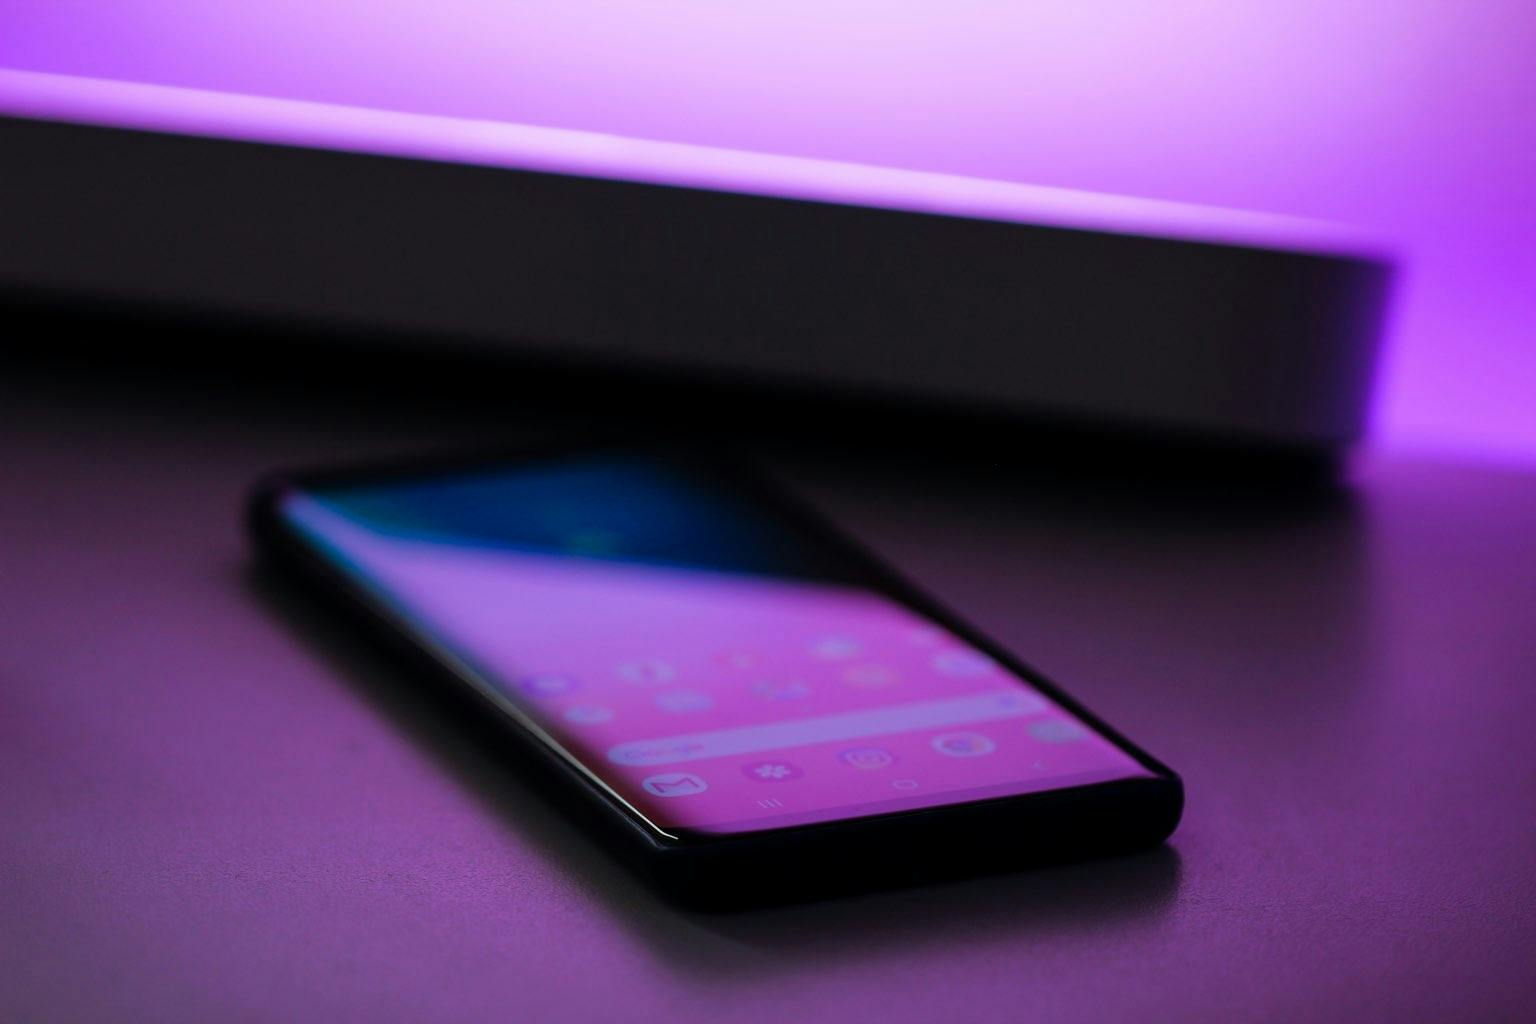 Phone laying on table, with purple lighting